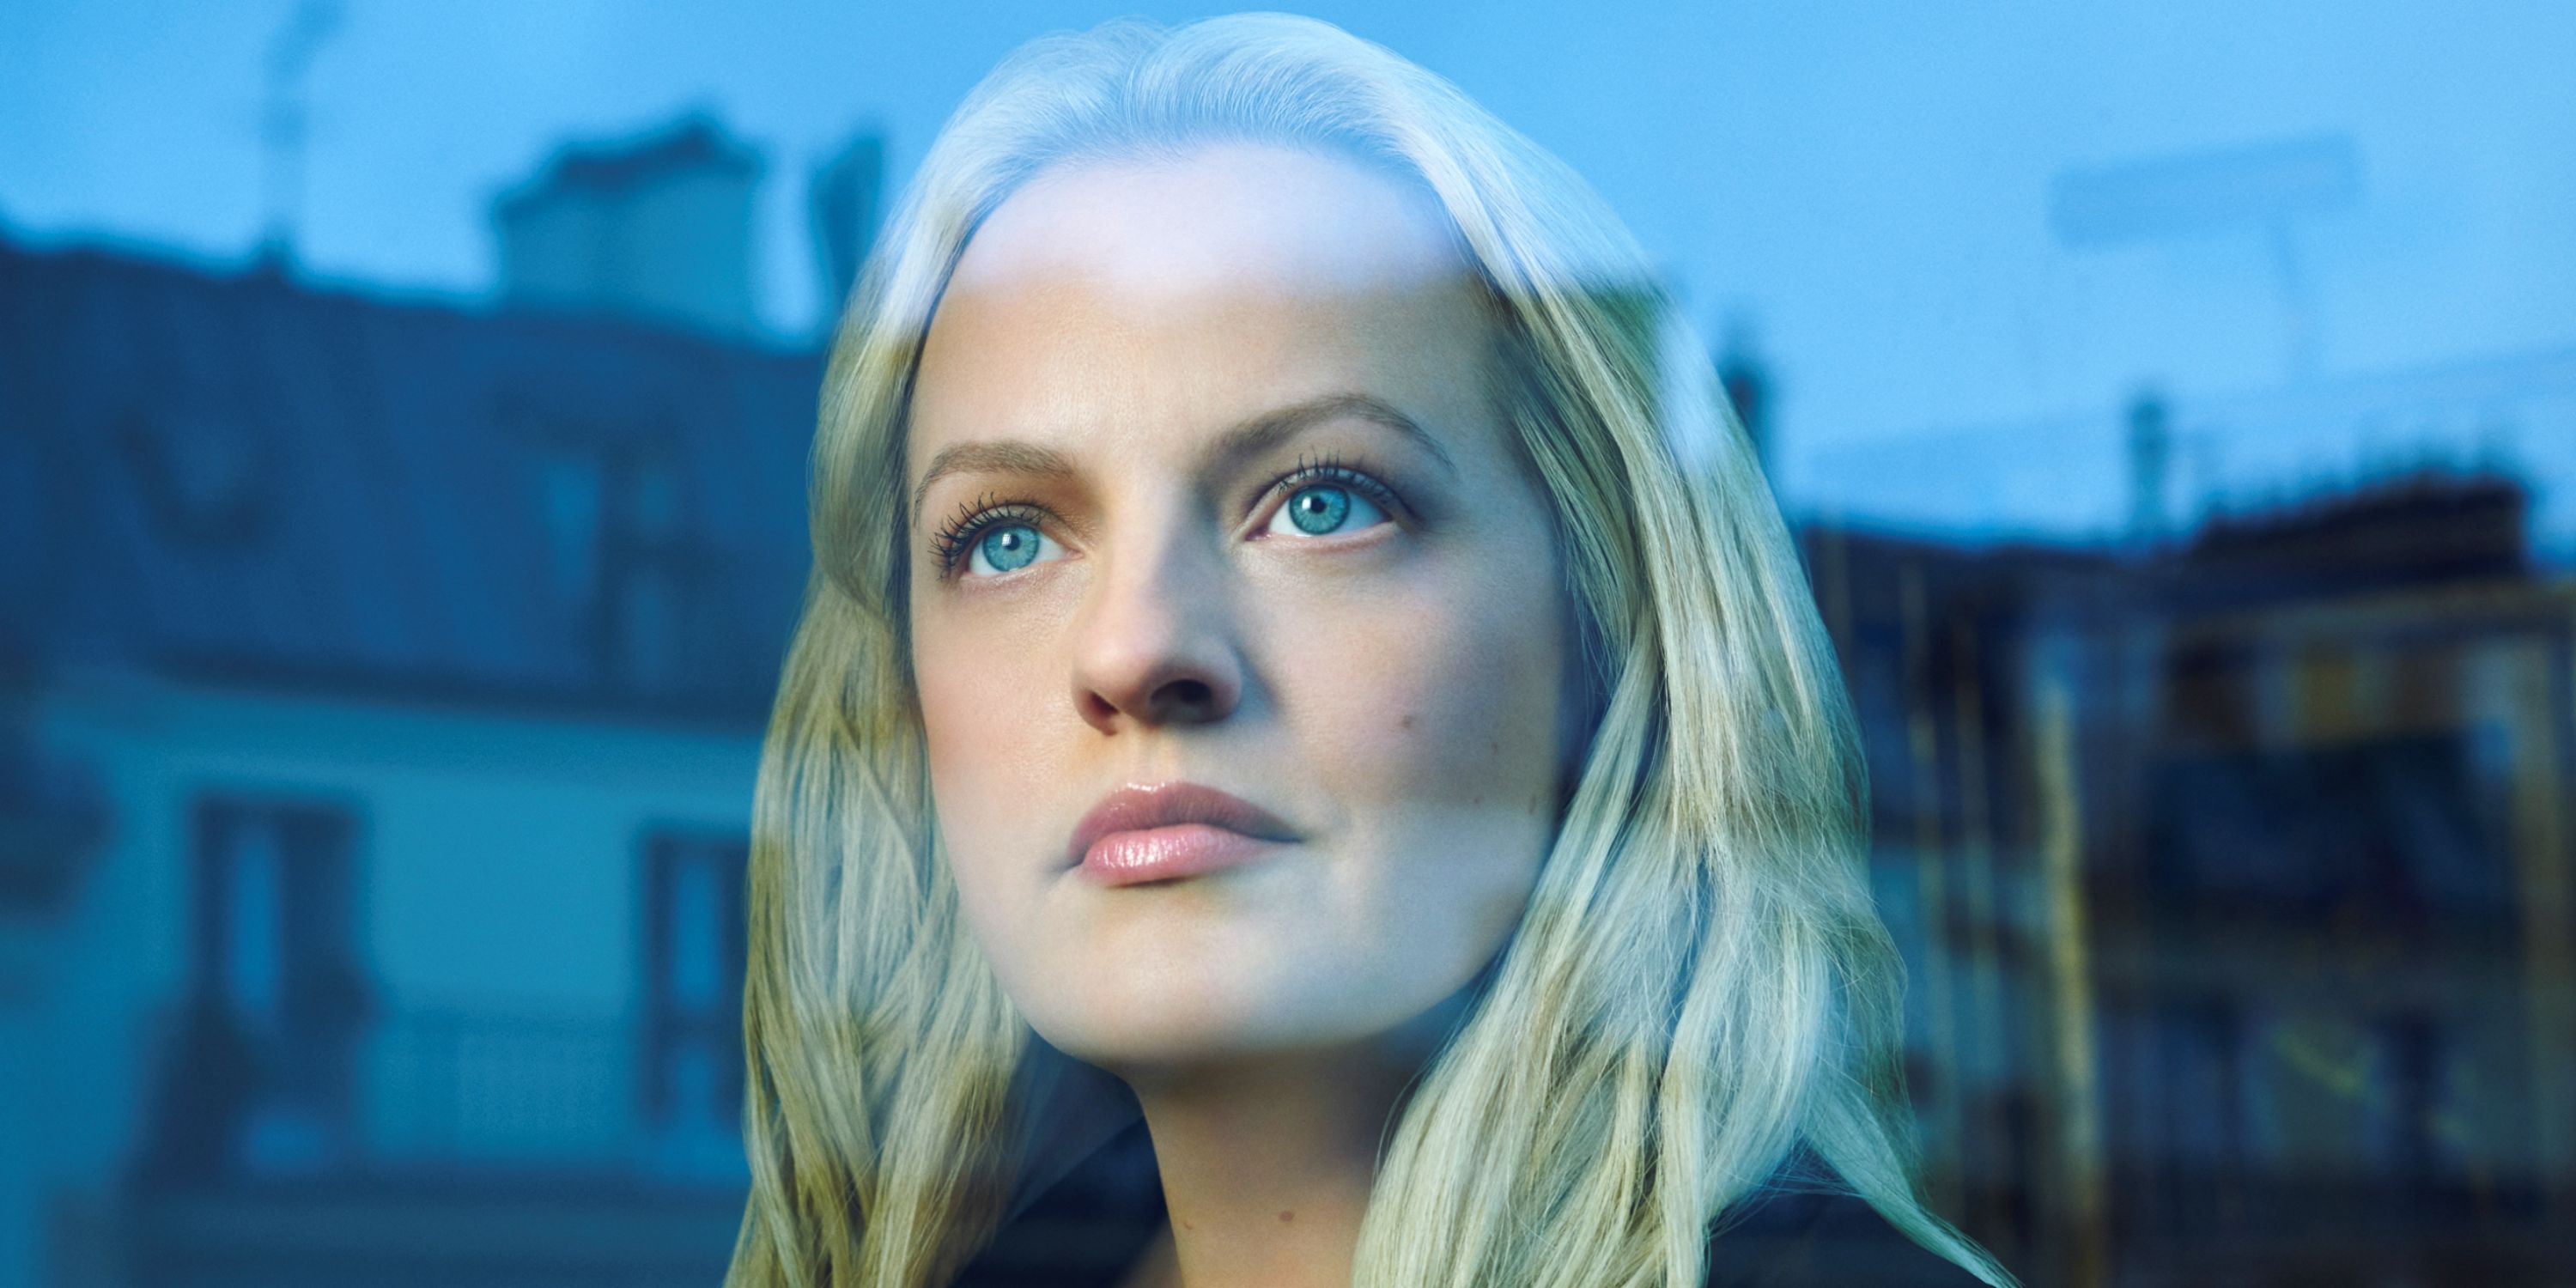 Elisabeth Moss as Imogen Salter looking out a window in an FX gallery promo shot for The Veil